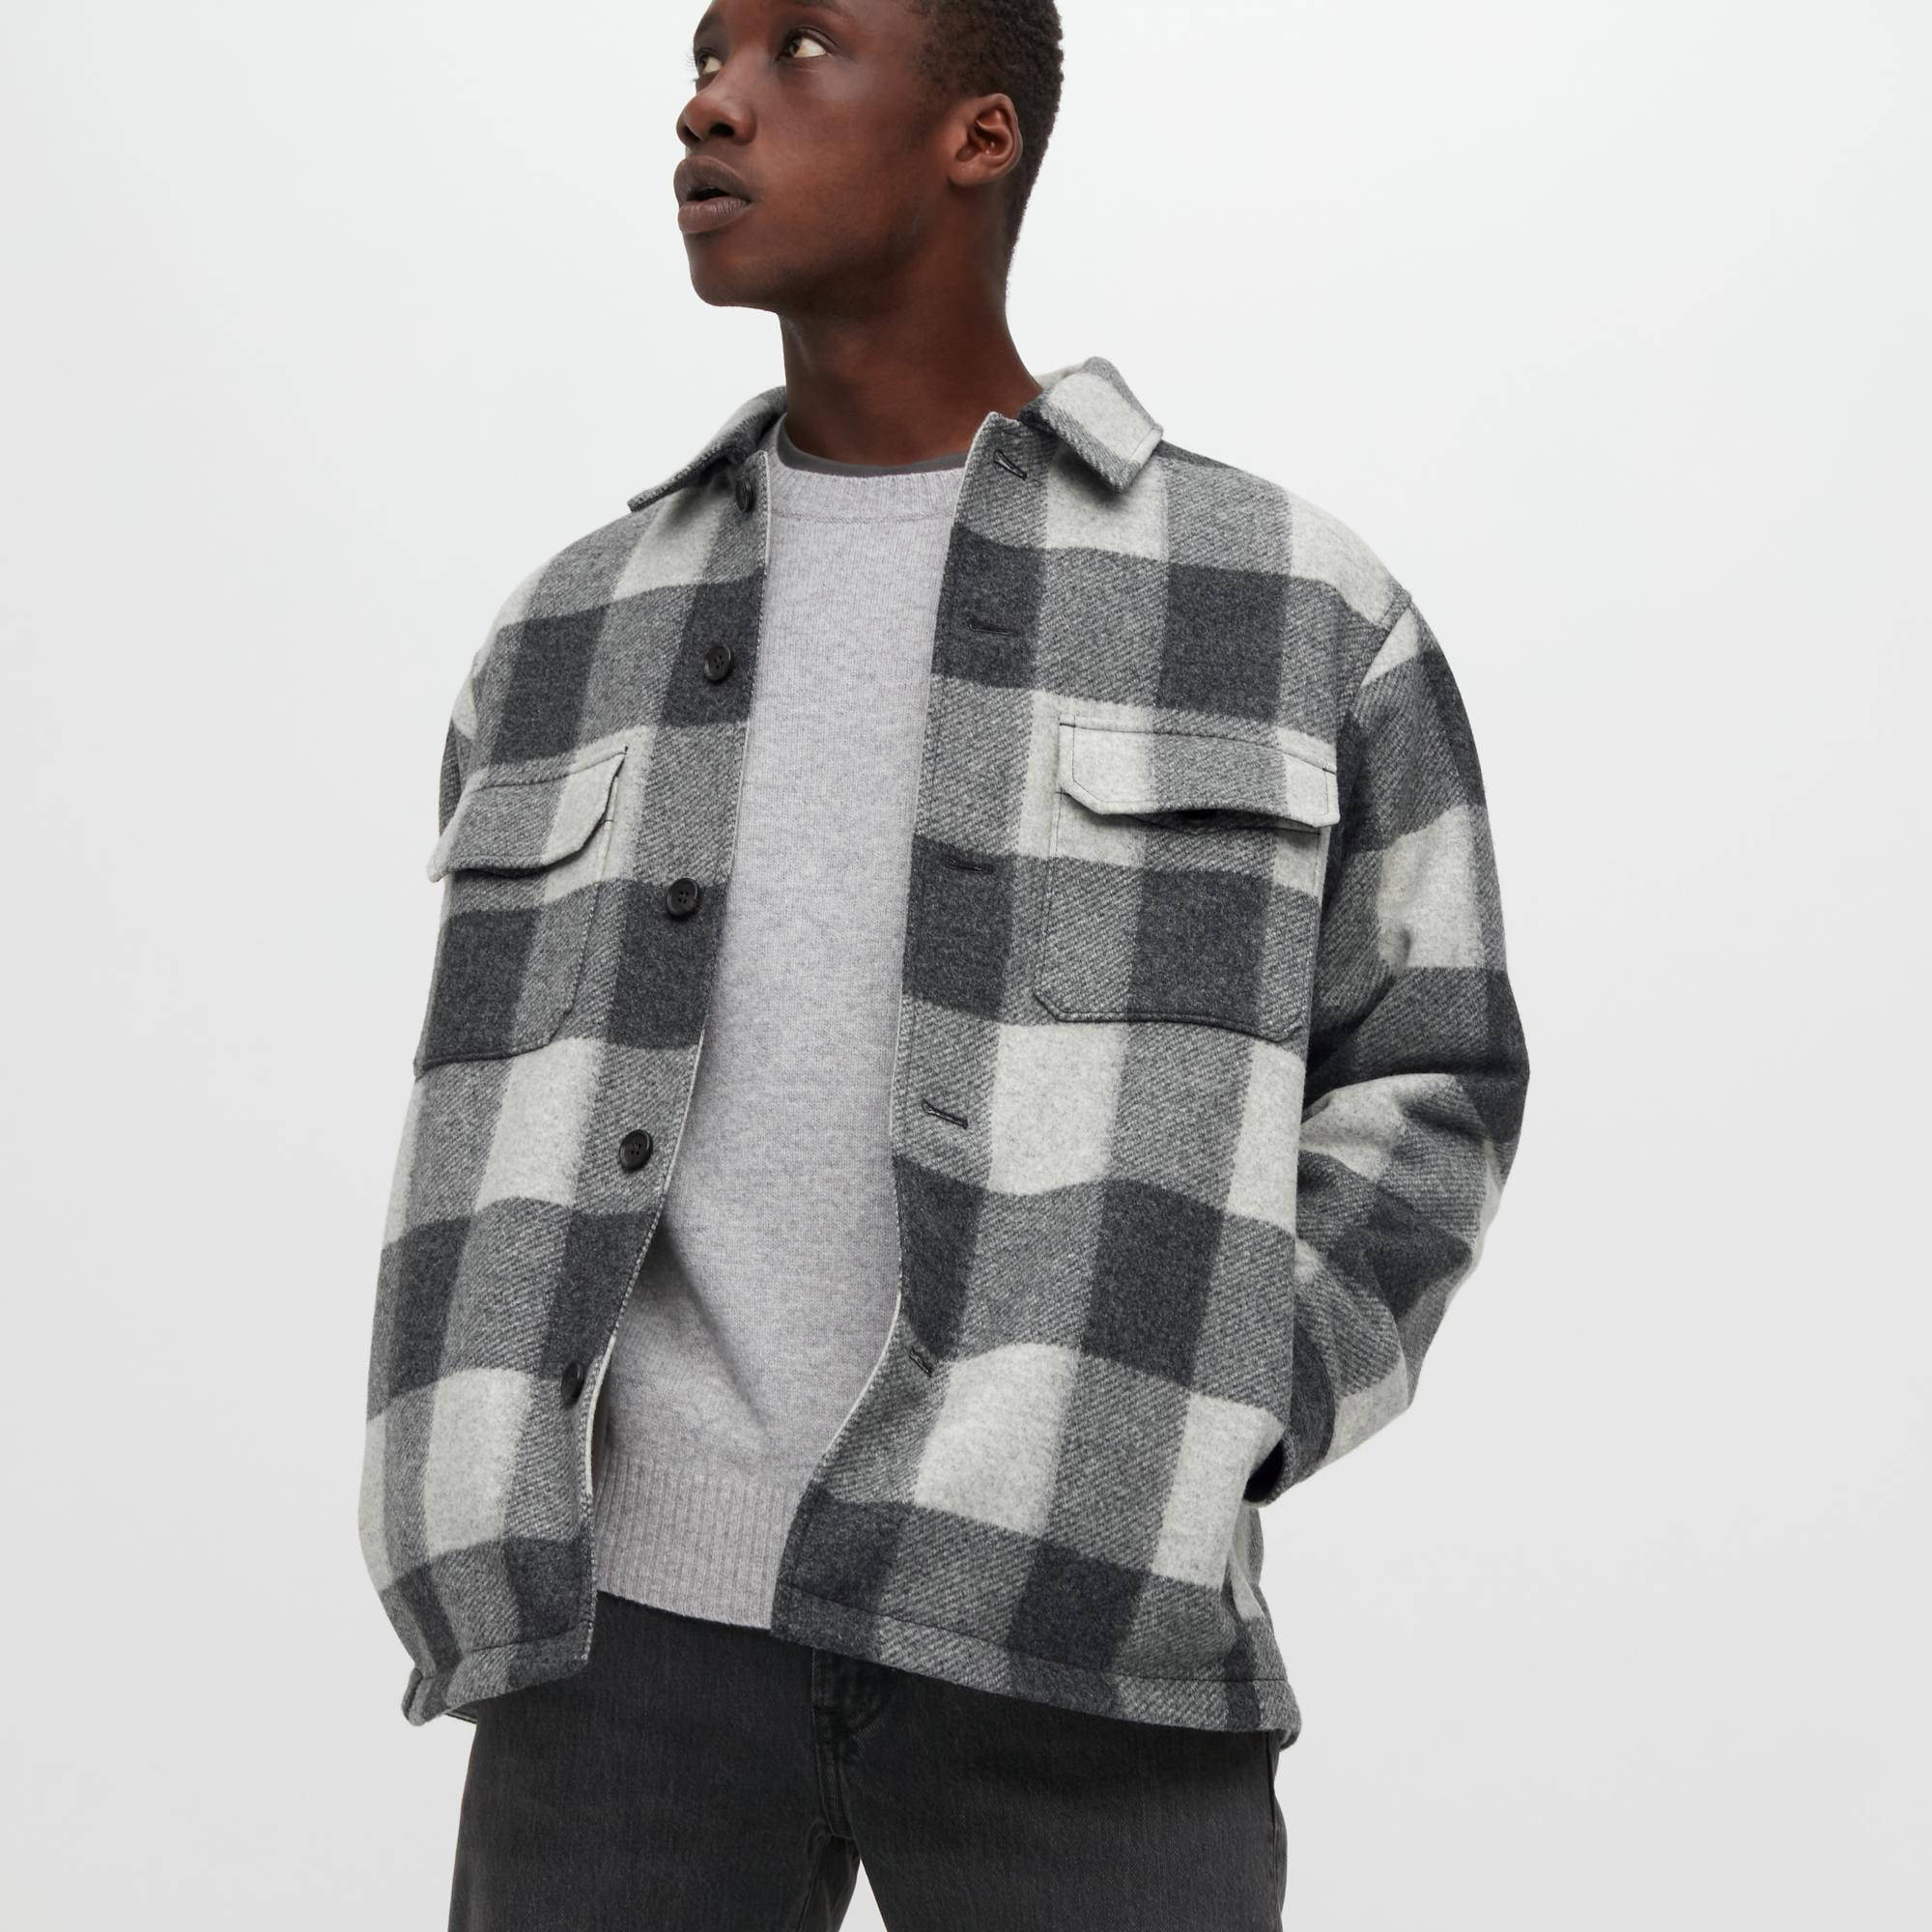 Uniqlo Checked Overshirt Jacket - Grey | The Sole Supplier